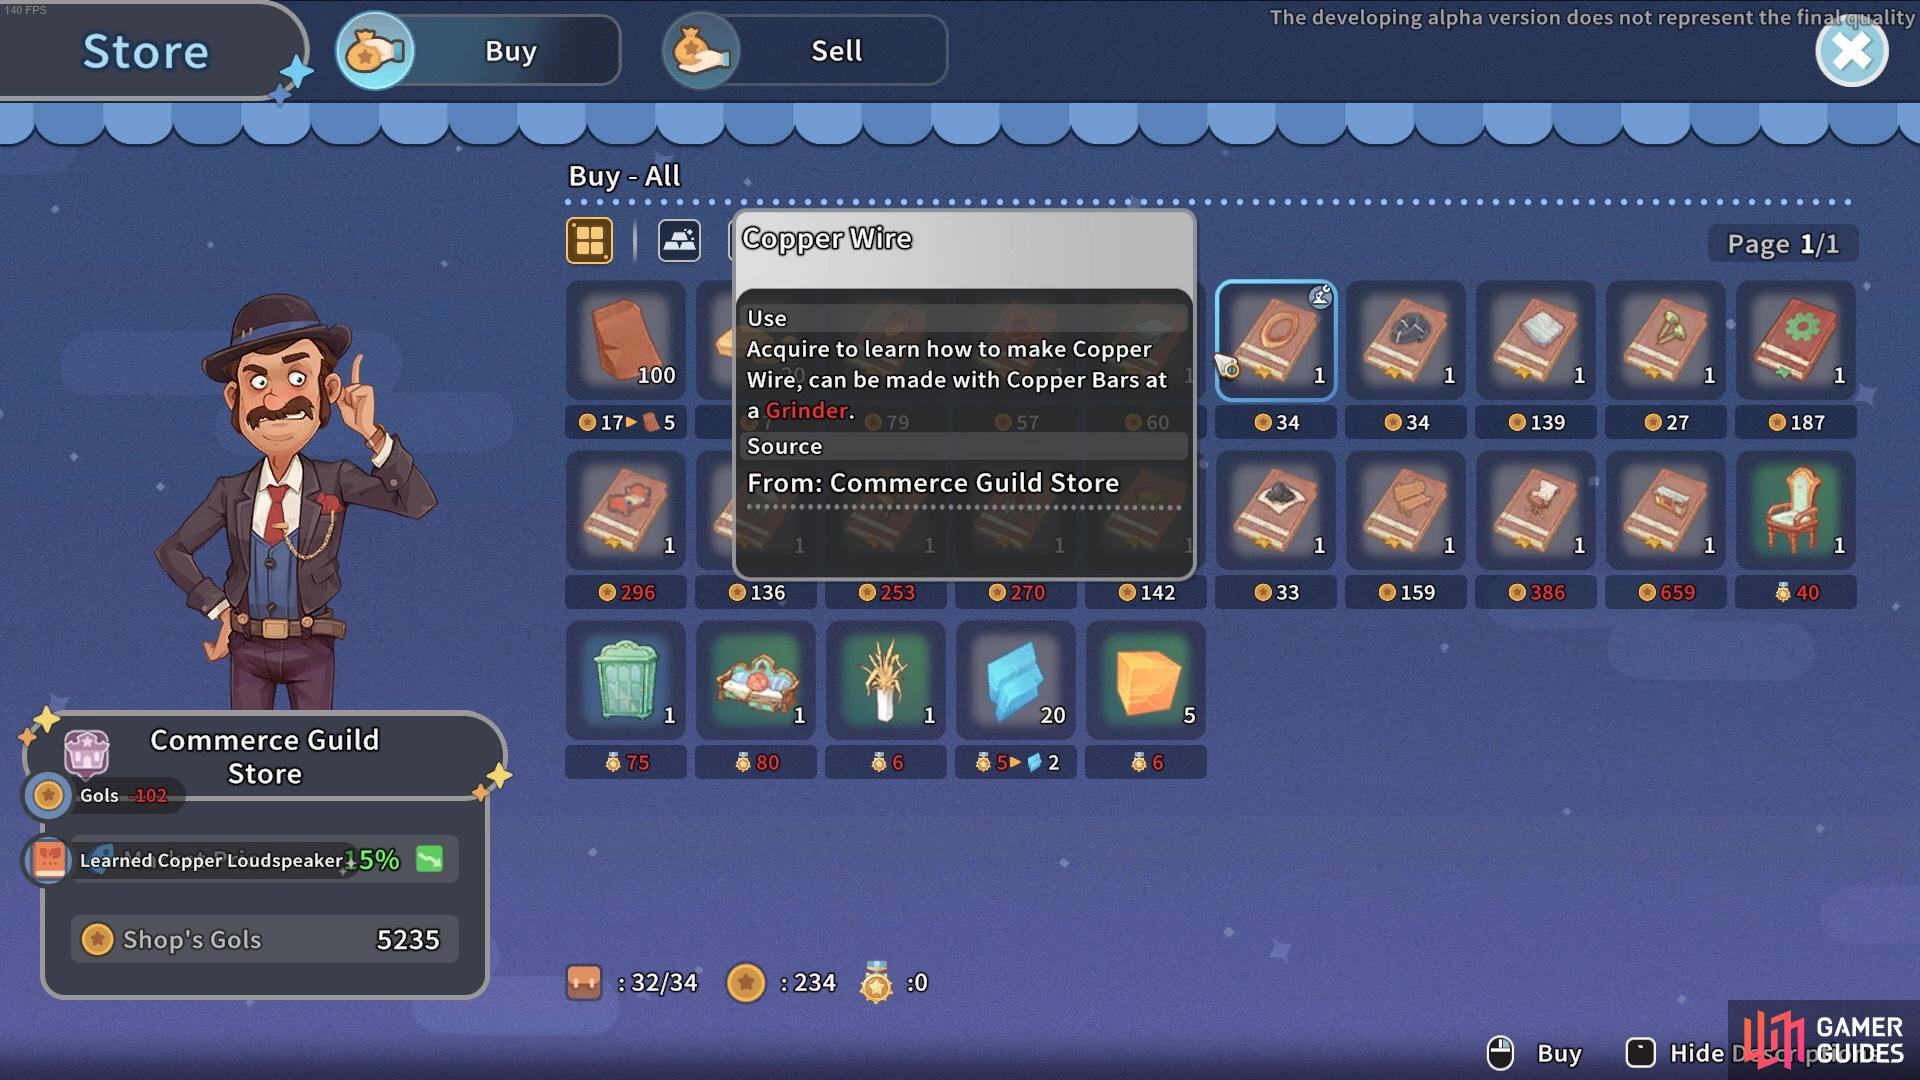 You'll first need to purchase the recipe from the Commerce Guild Shop